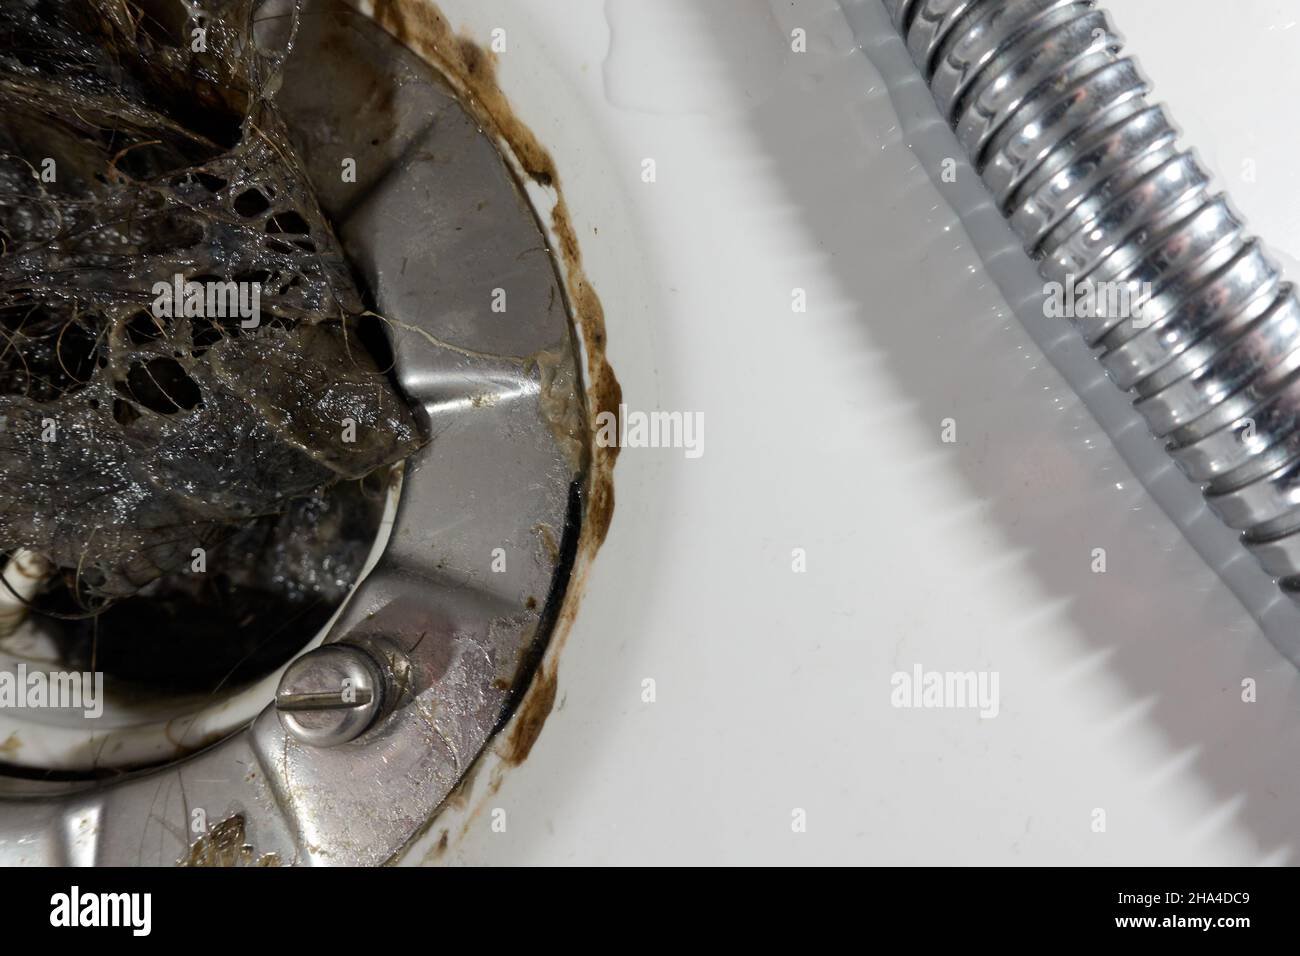 Hair in shower drain siphon. Many hairs have caused a pipe blockage and water damage. Closeup Stock Photo